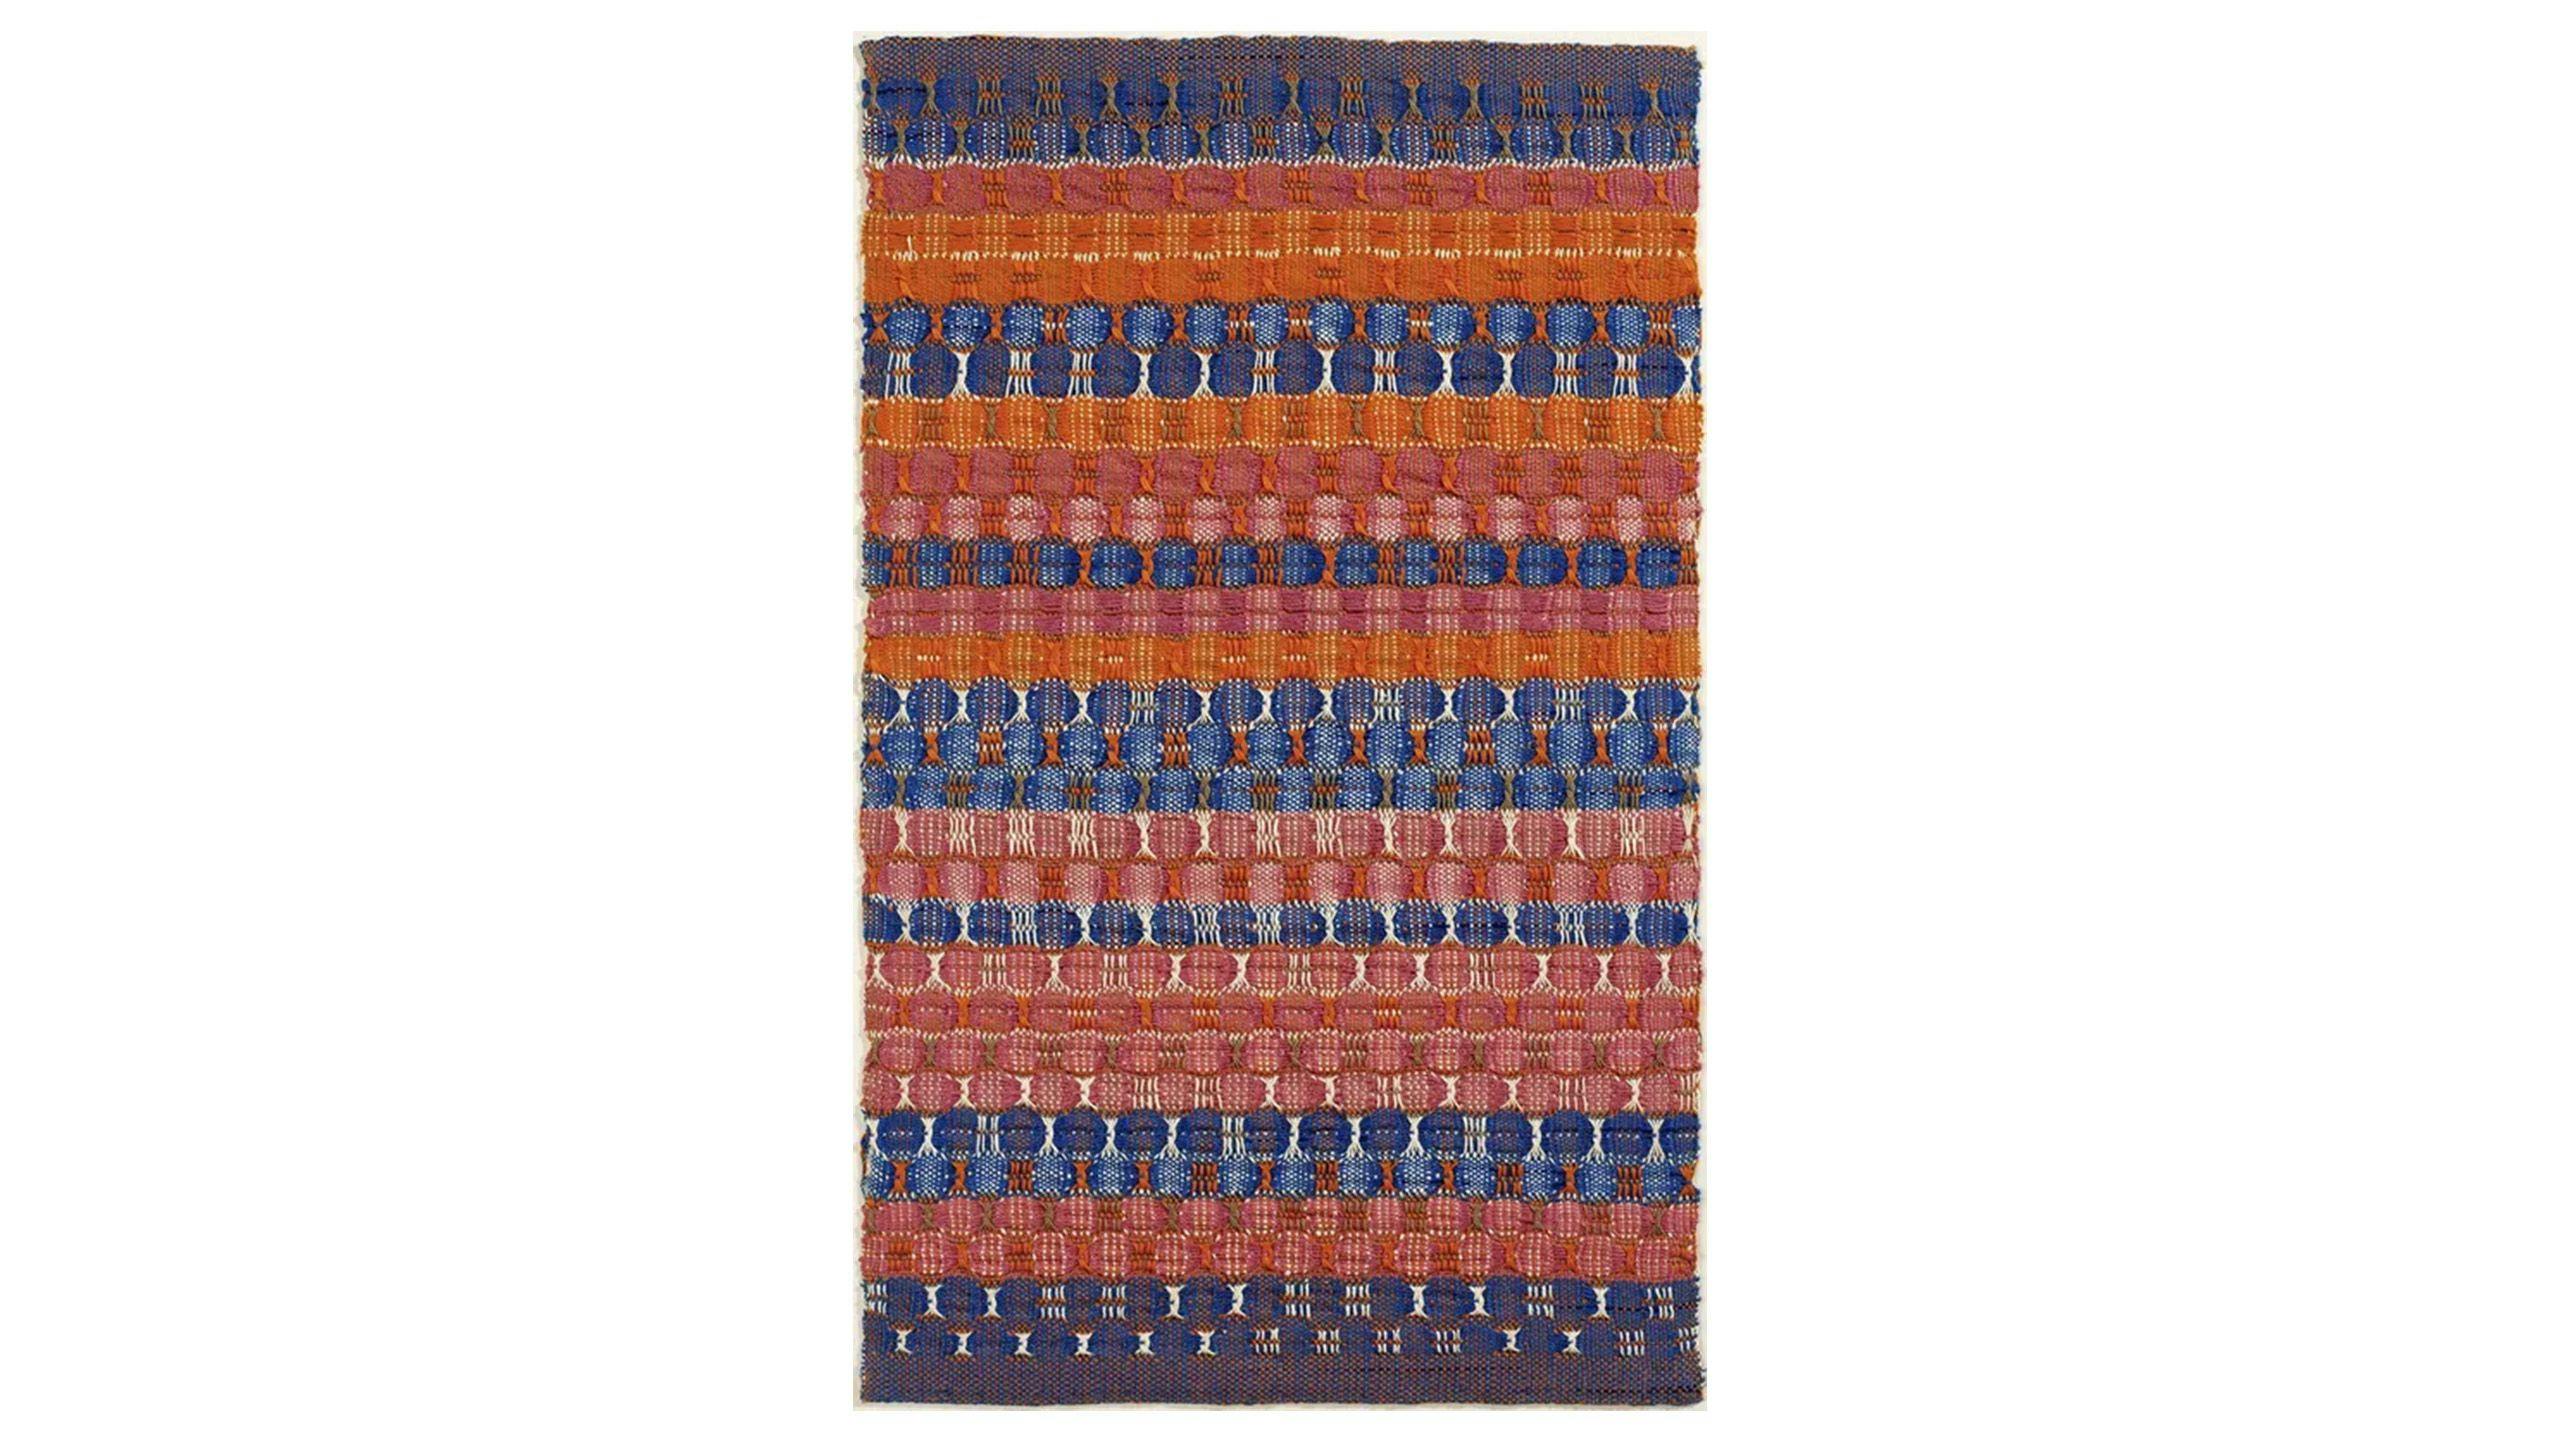 A work by Anni Albers, titled Red and Blue Layers, dated 1954